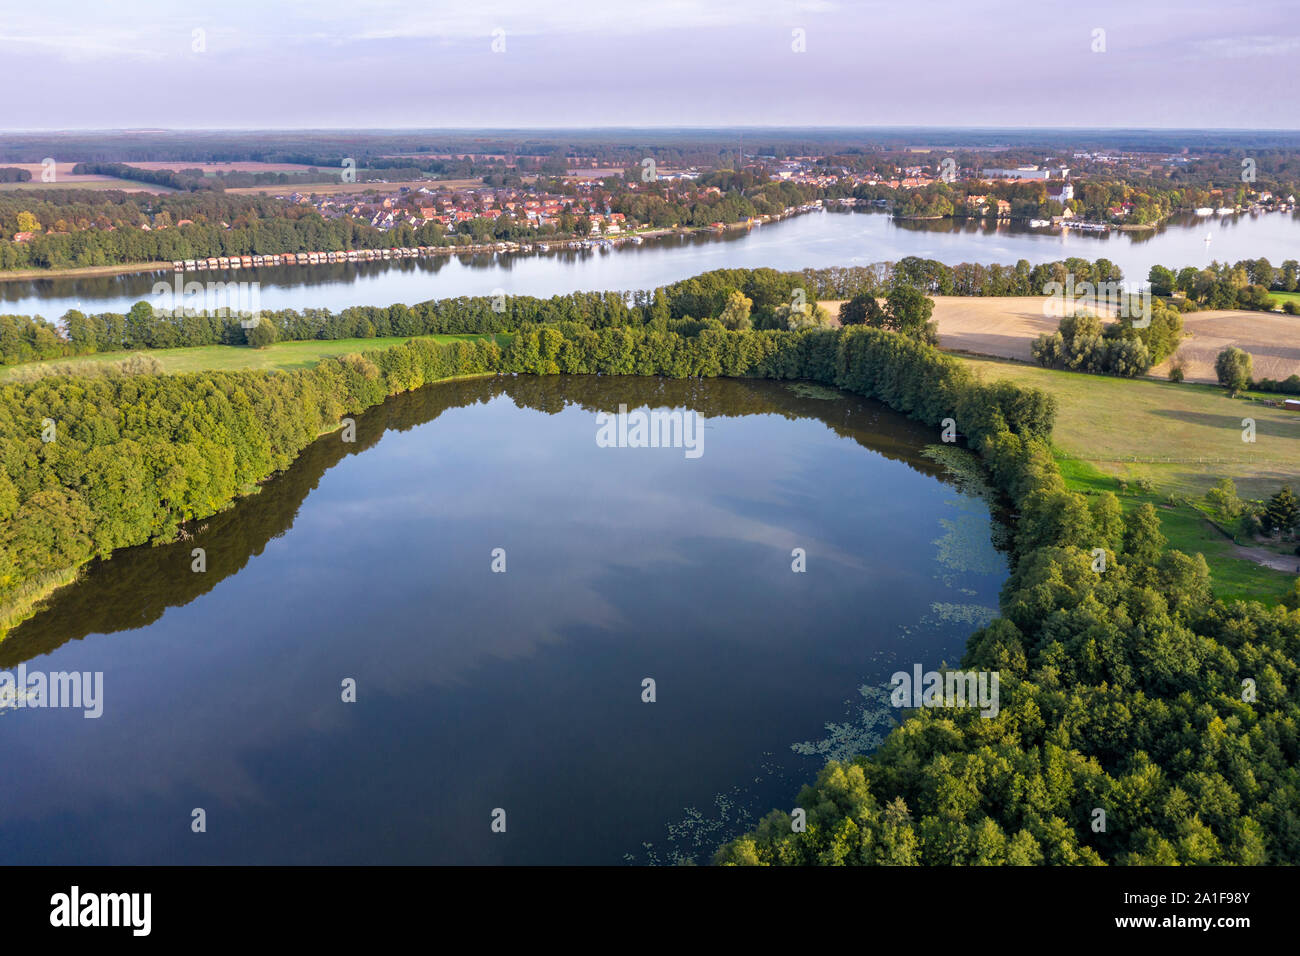 Drone shot, aerial view over  lake Schulzensee to lake Mirow, castle Mirow on island back right, Mecklenburg lake district, Mecklenburg-Vorpommern, Ge Stock Photo